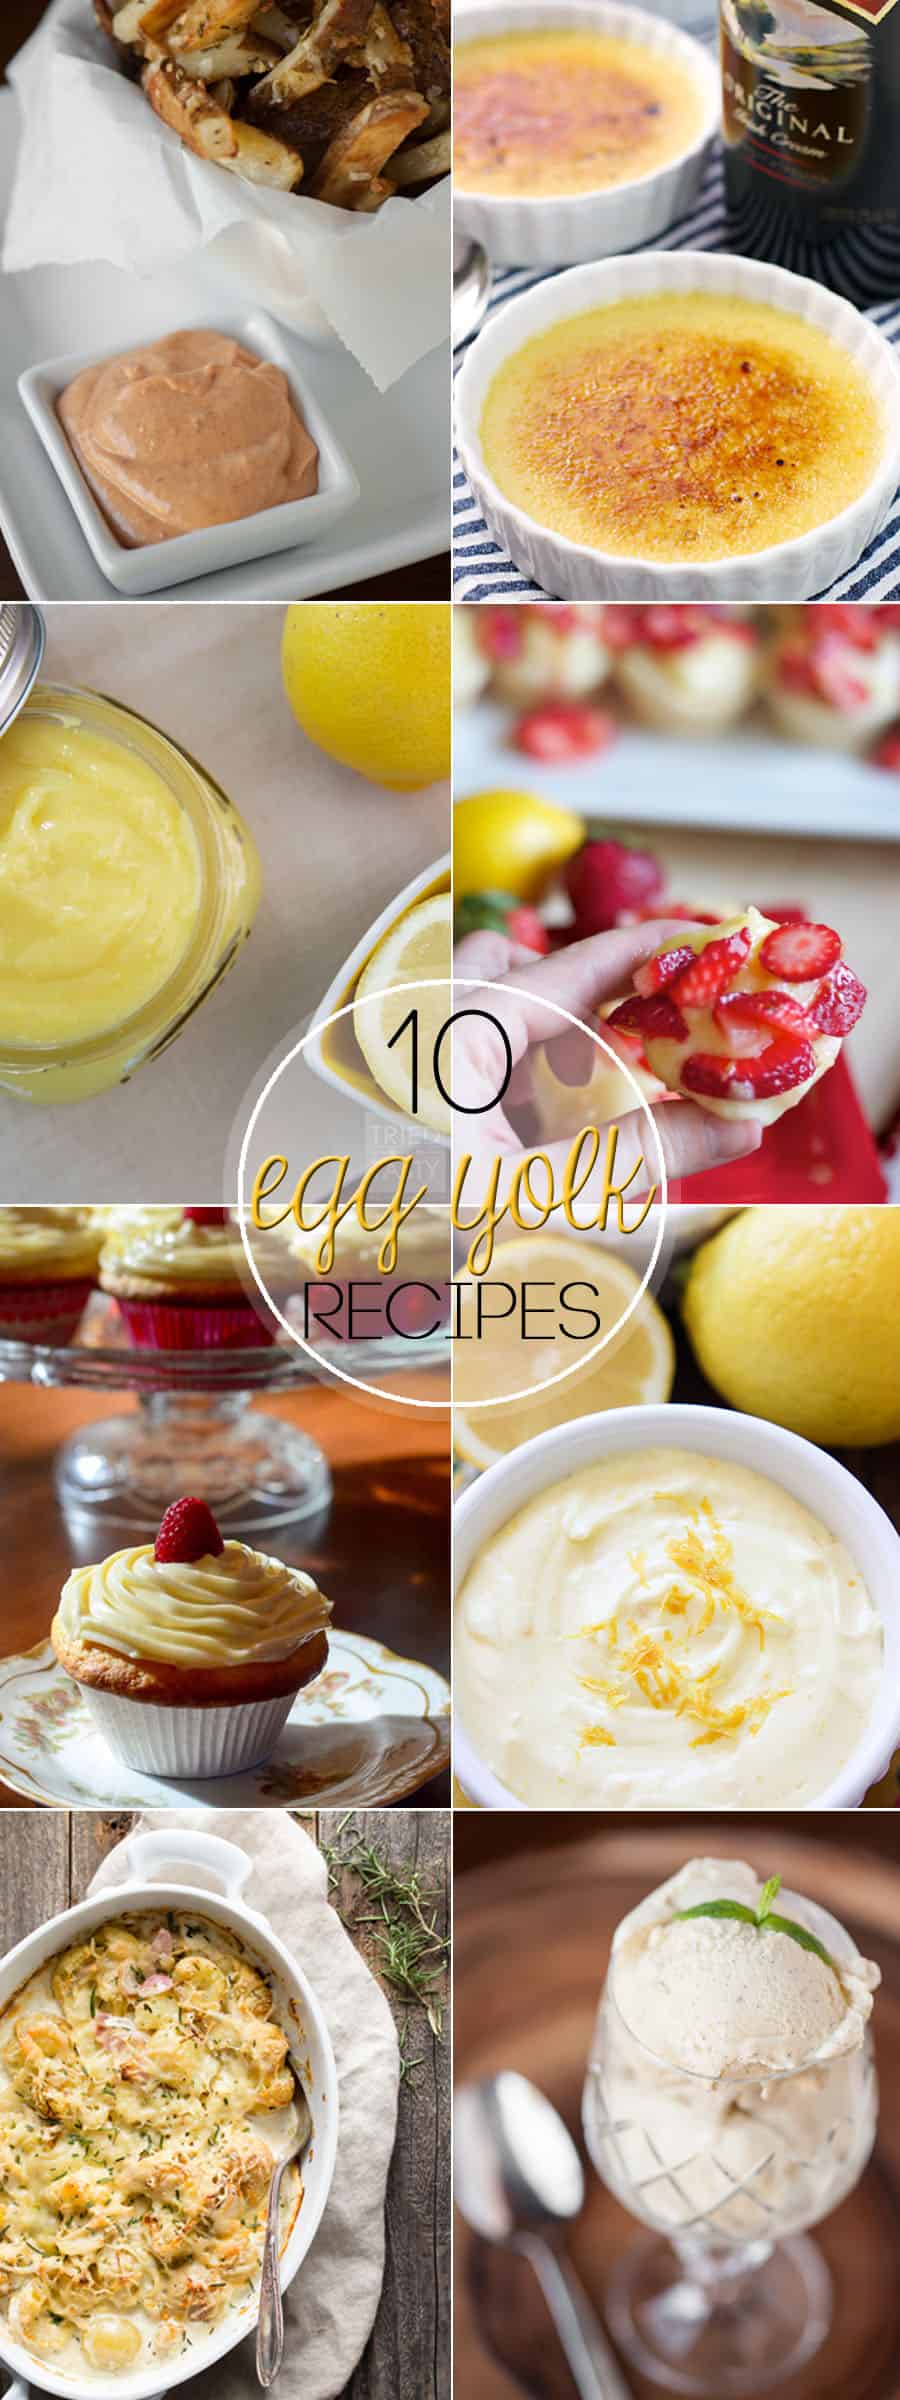 10 Recipes To Use Up Egg Yolks // Tried and Tasty